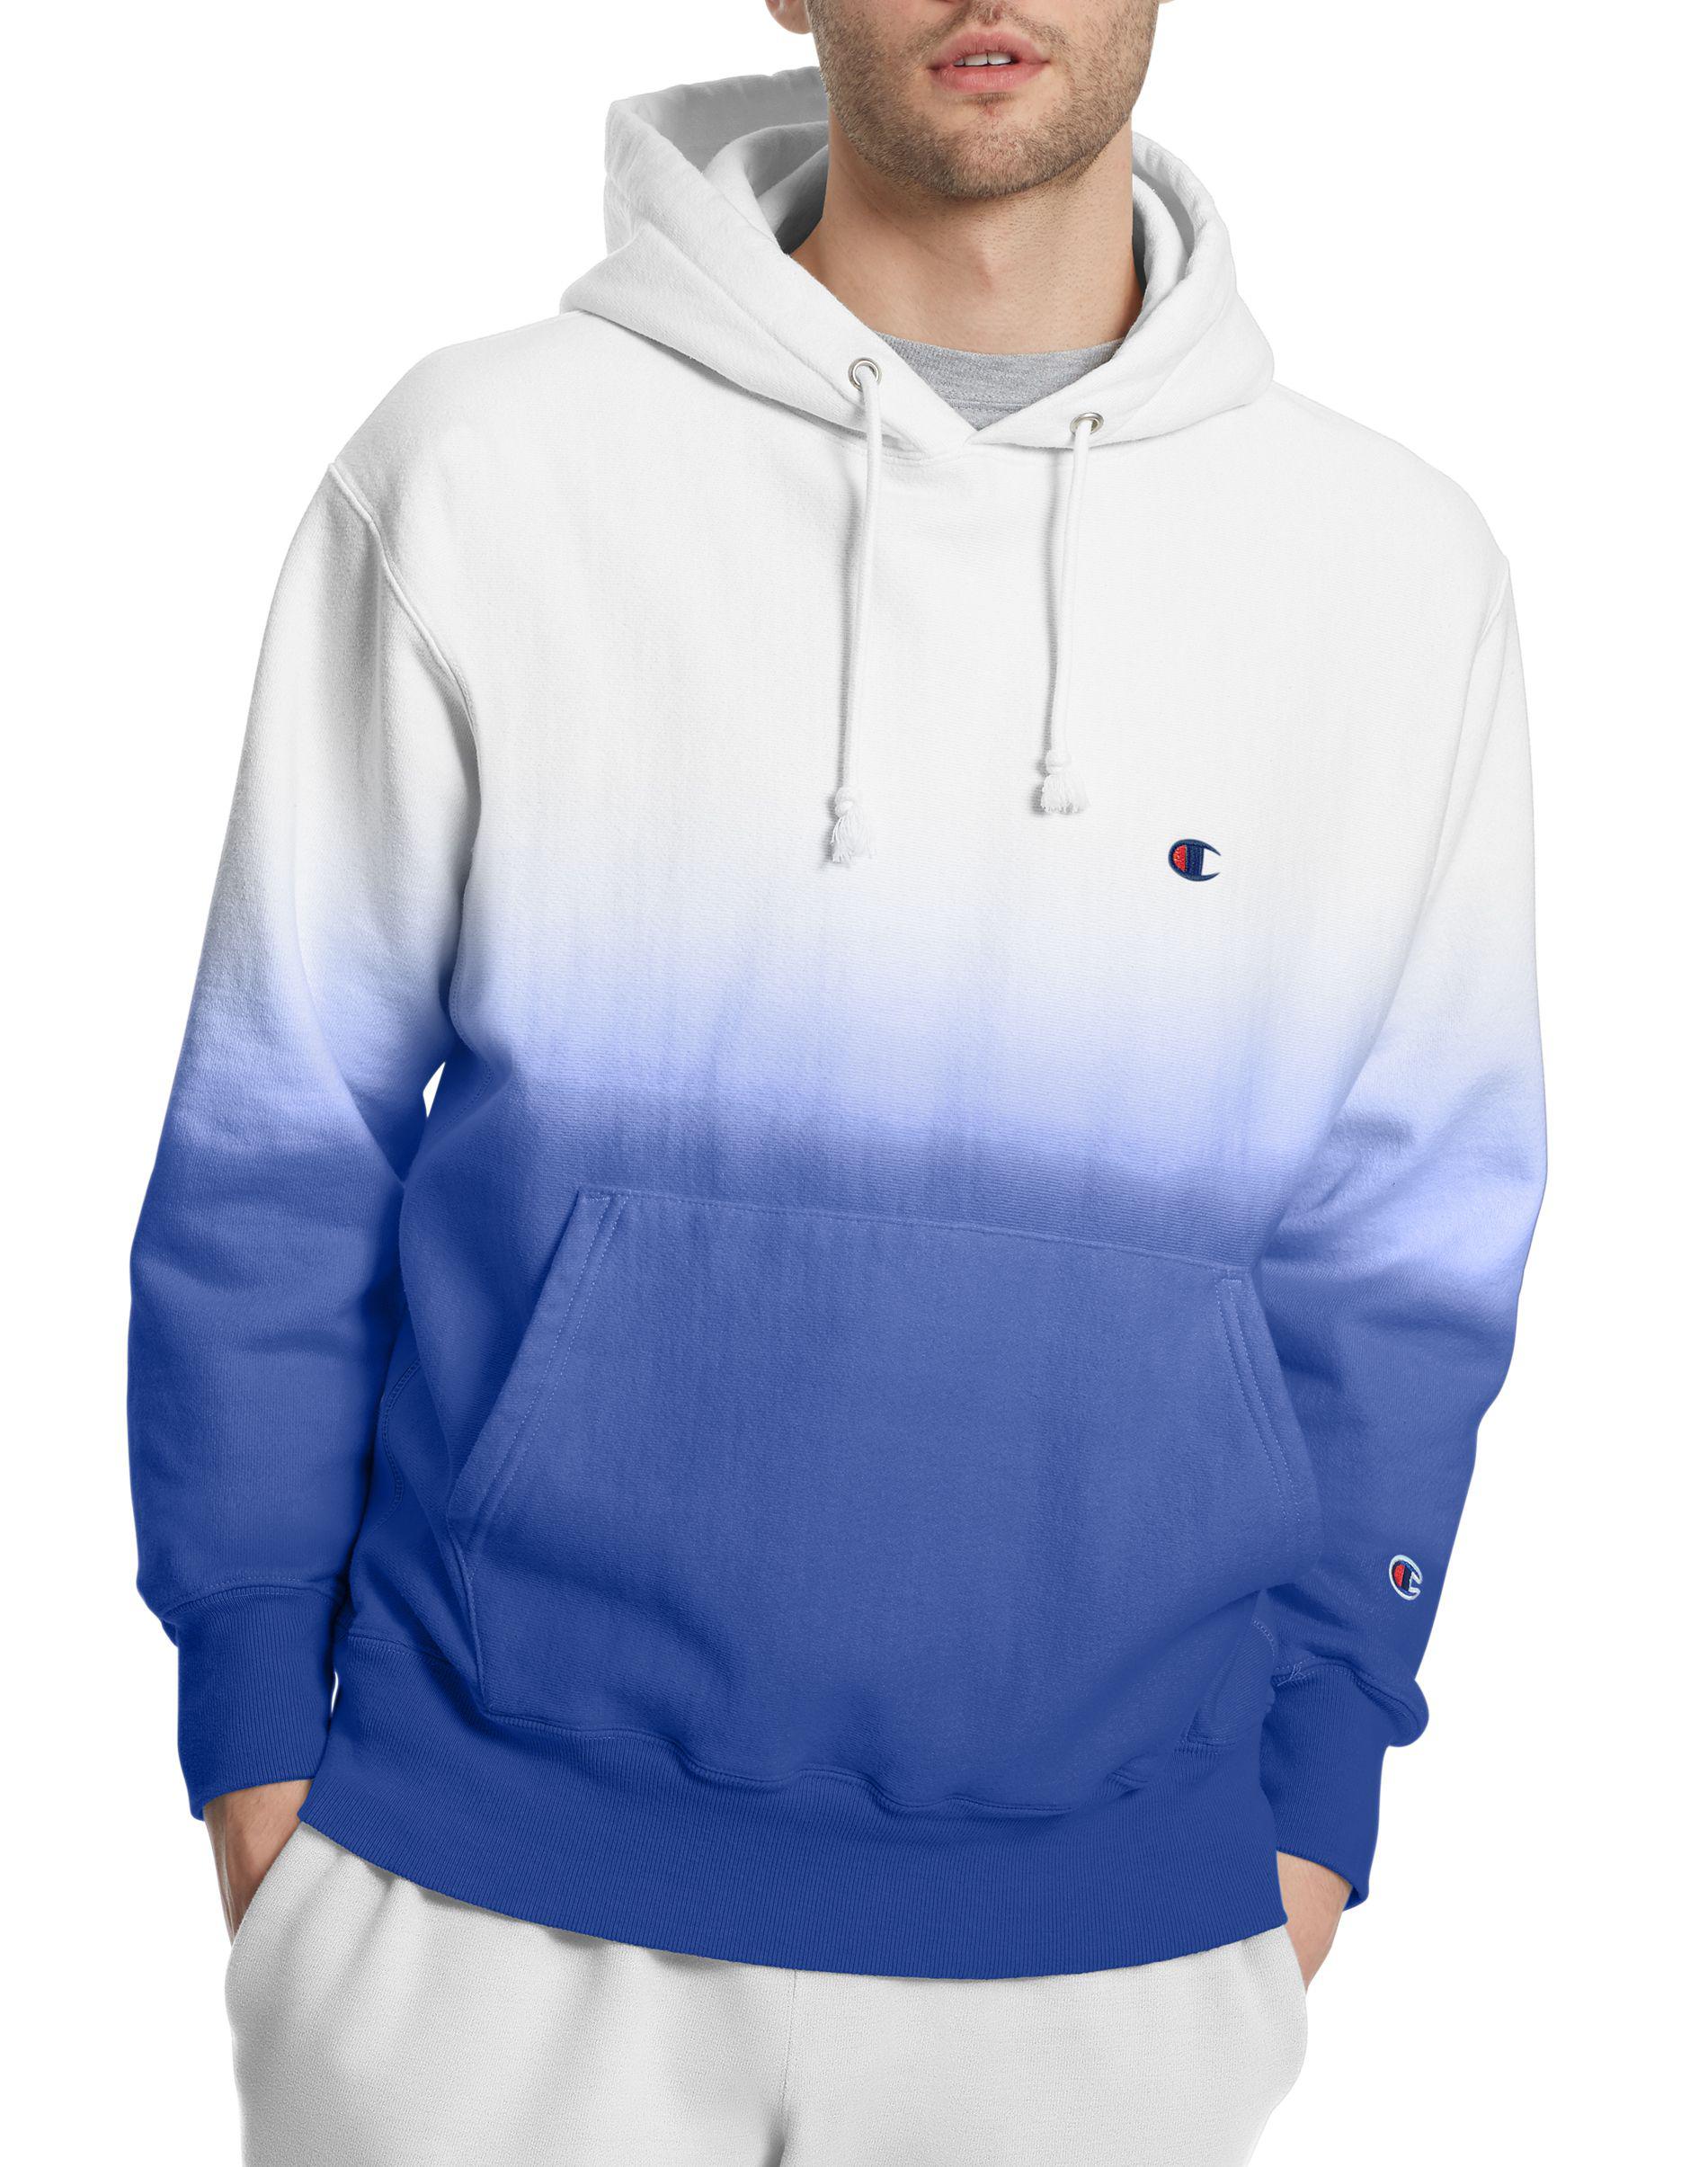 blue ombre champion hoodie